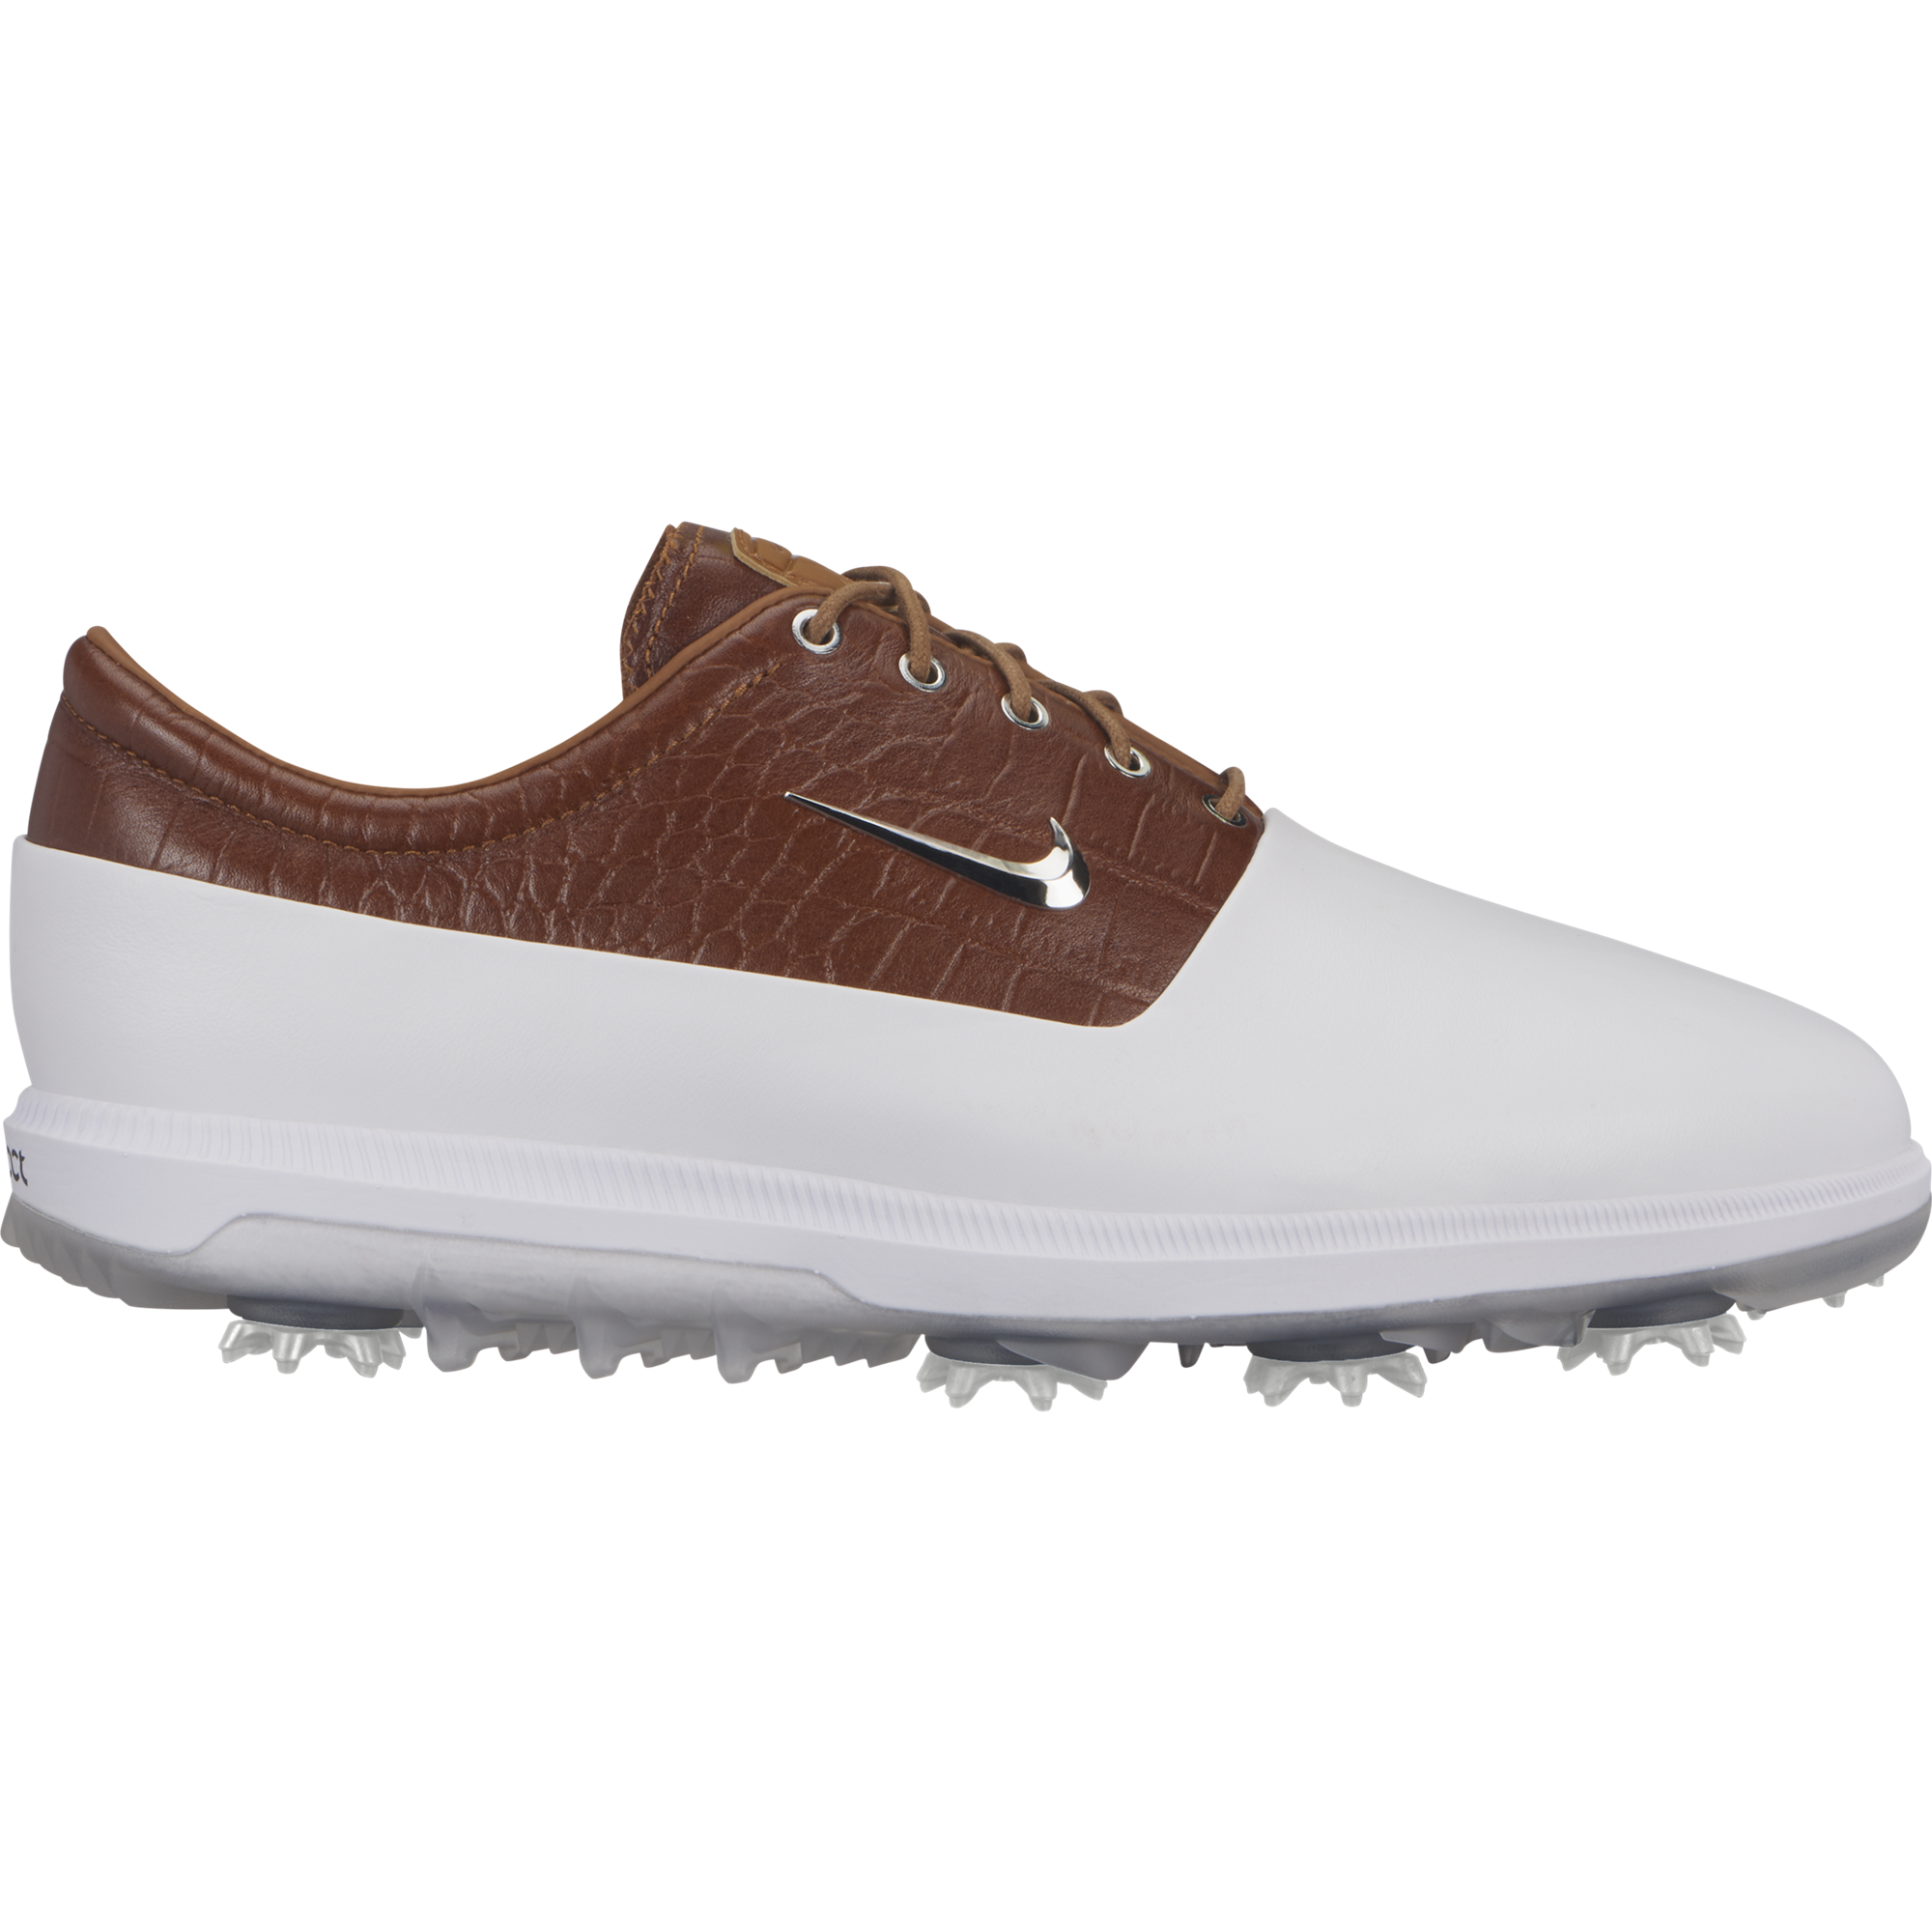 nike golf shoes brown and white